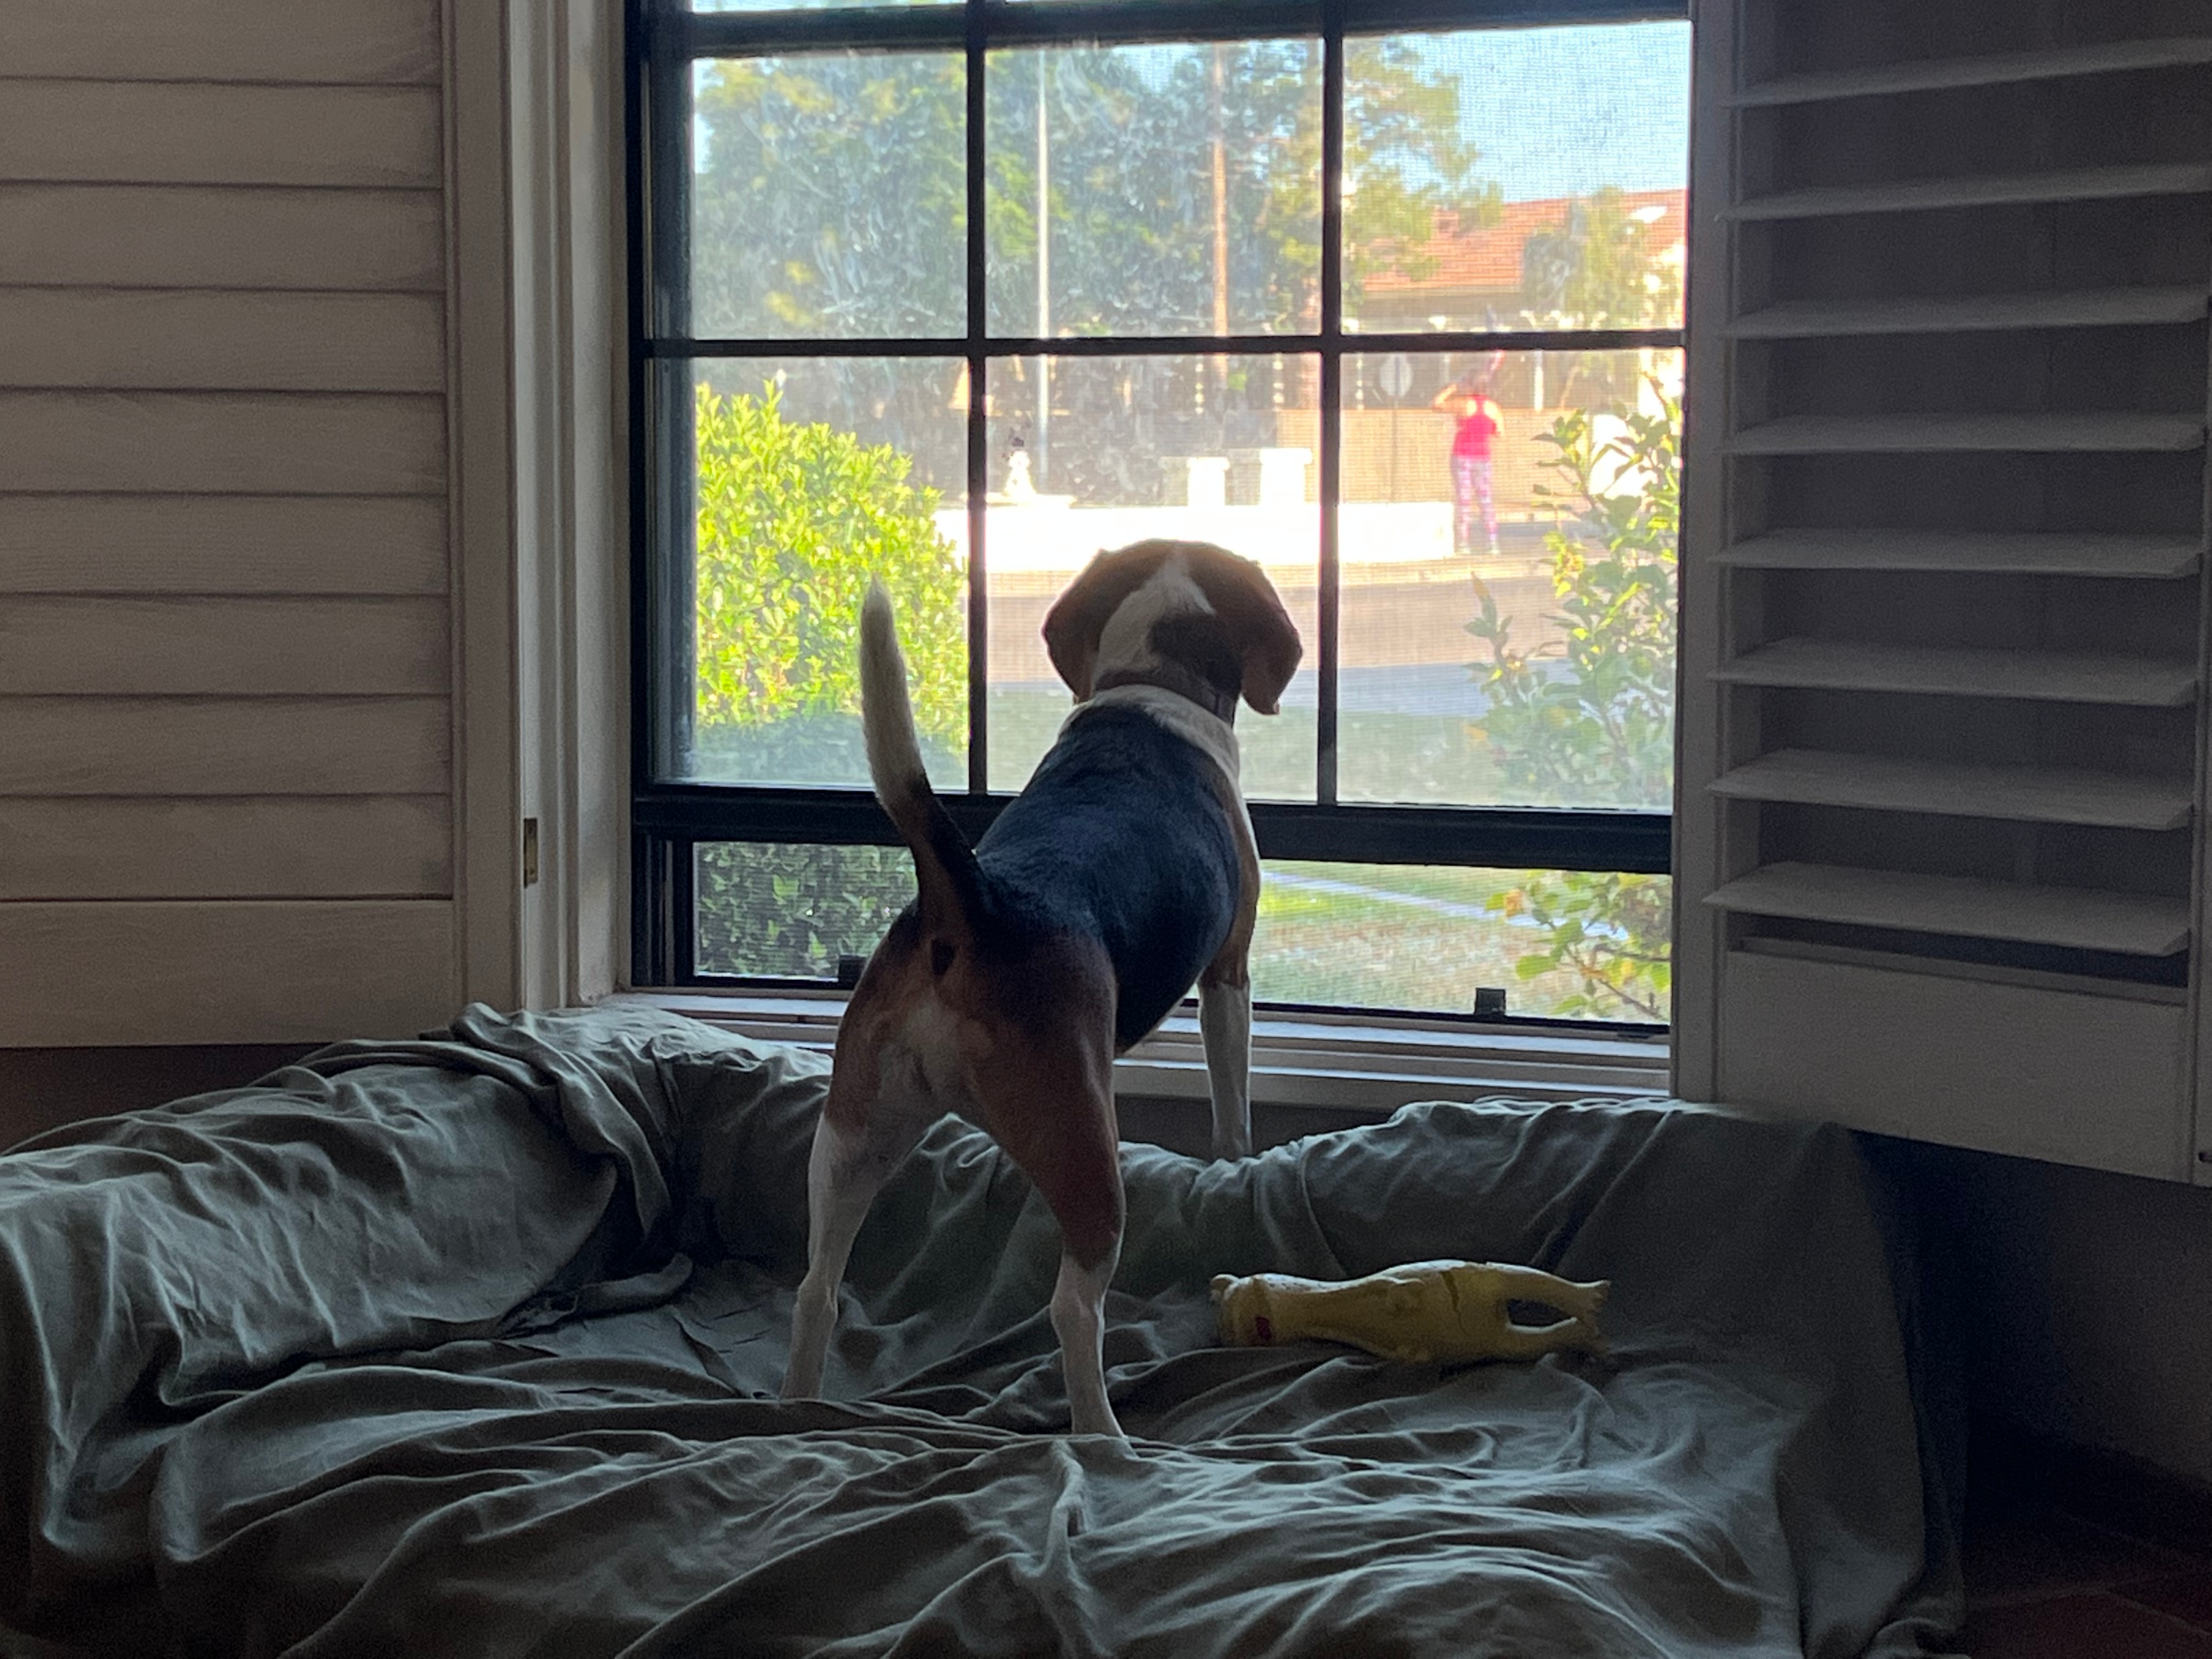 Beagle playing with a toy while watching outside the window